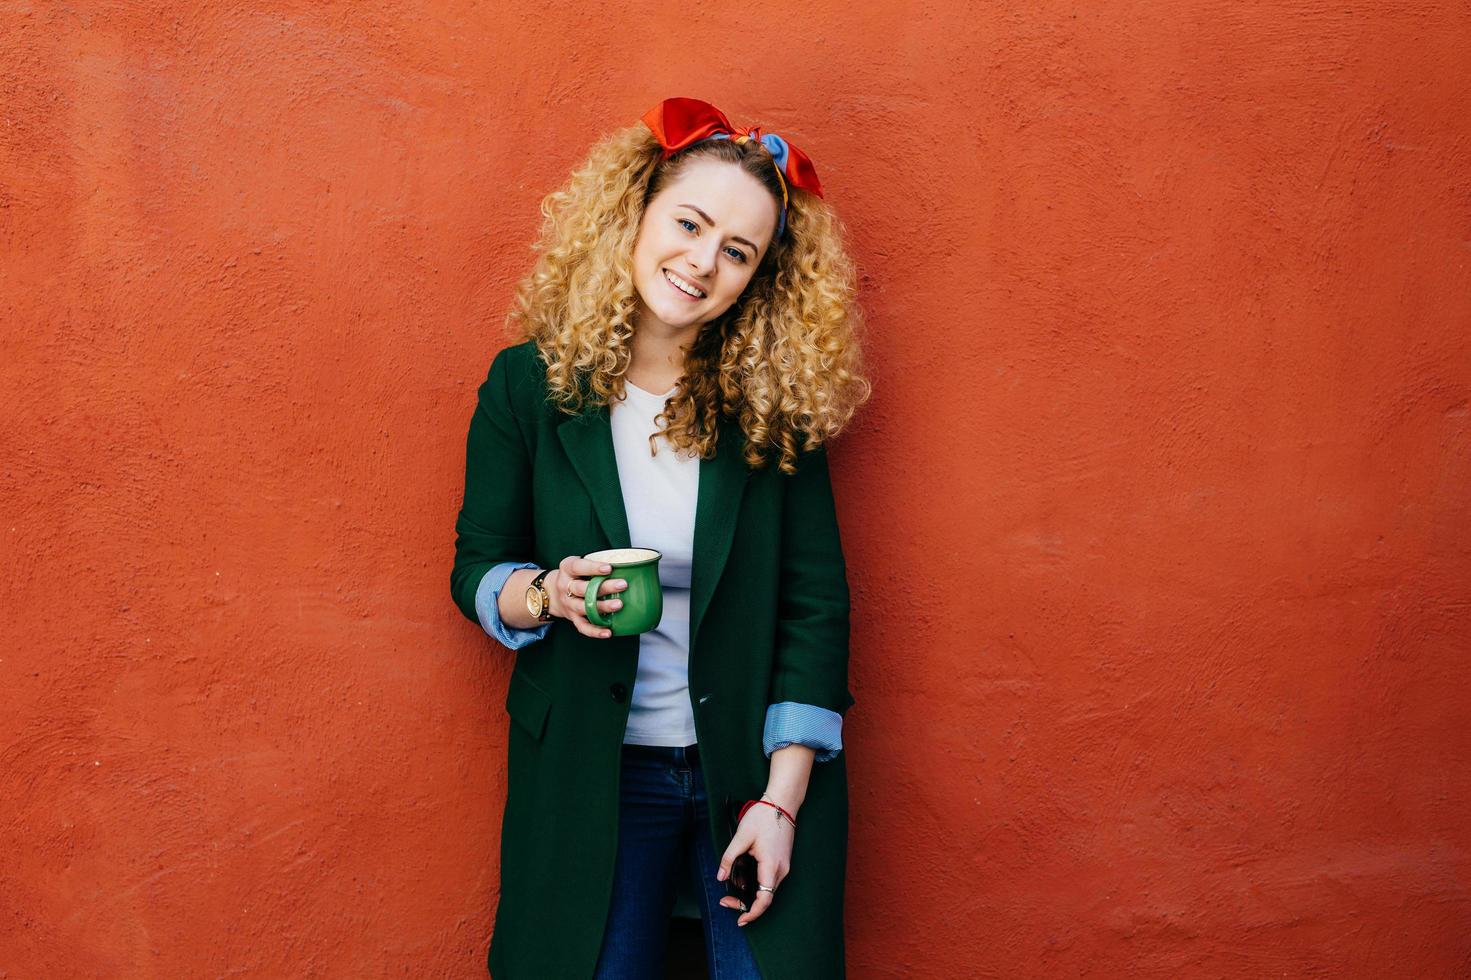 Young fashionable Caucasian woman with curly hair wearing headband and stylish jacket holding green cup of coffee having happy expression while resting against orange background. Woman with coffee mug photo